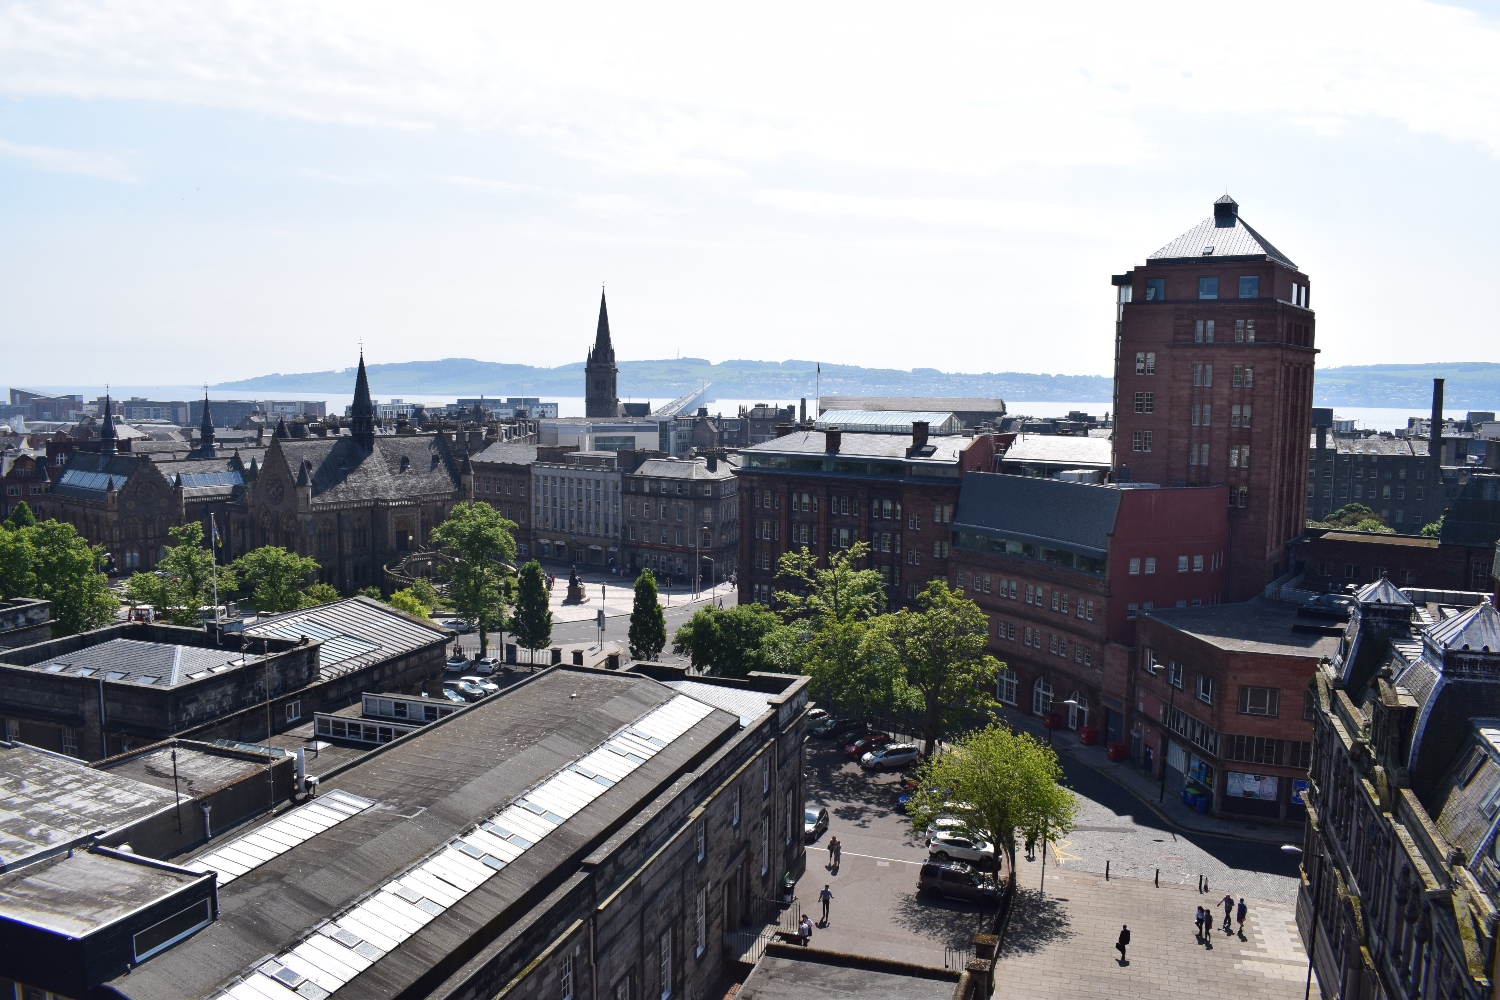 City of Dundee towards the river, from a roof top